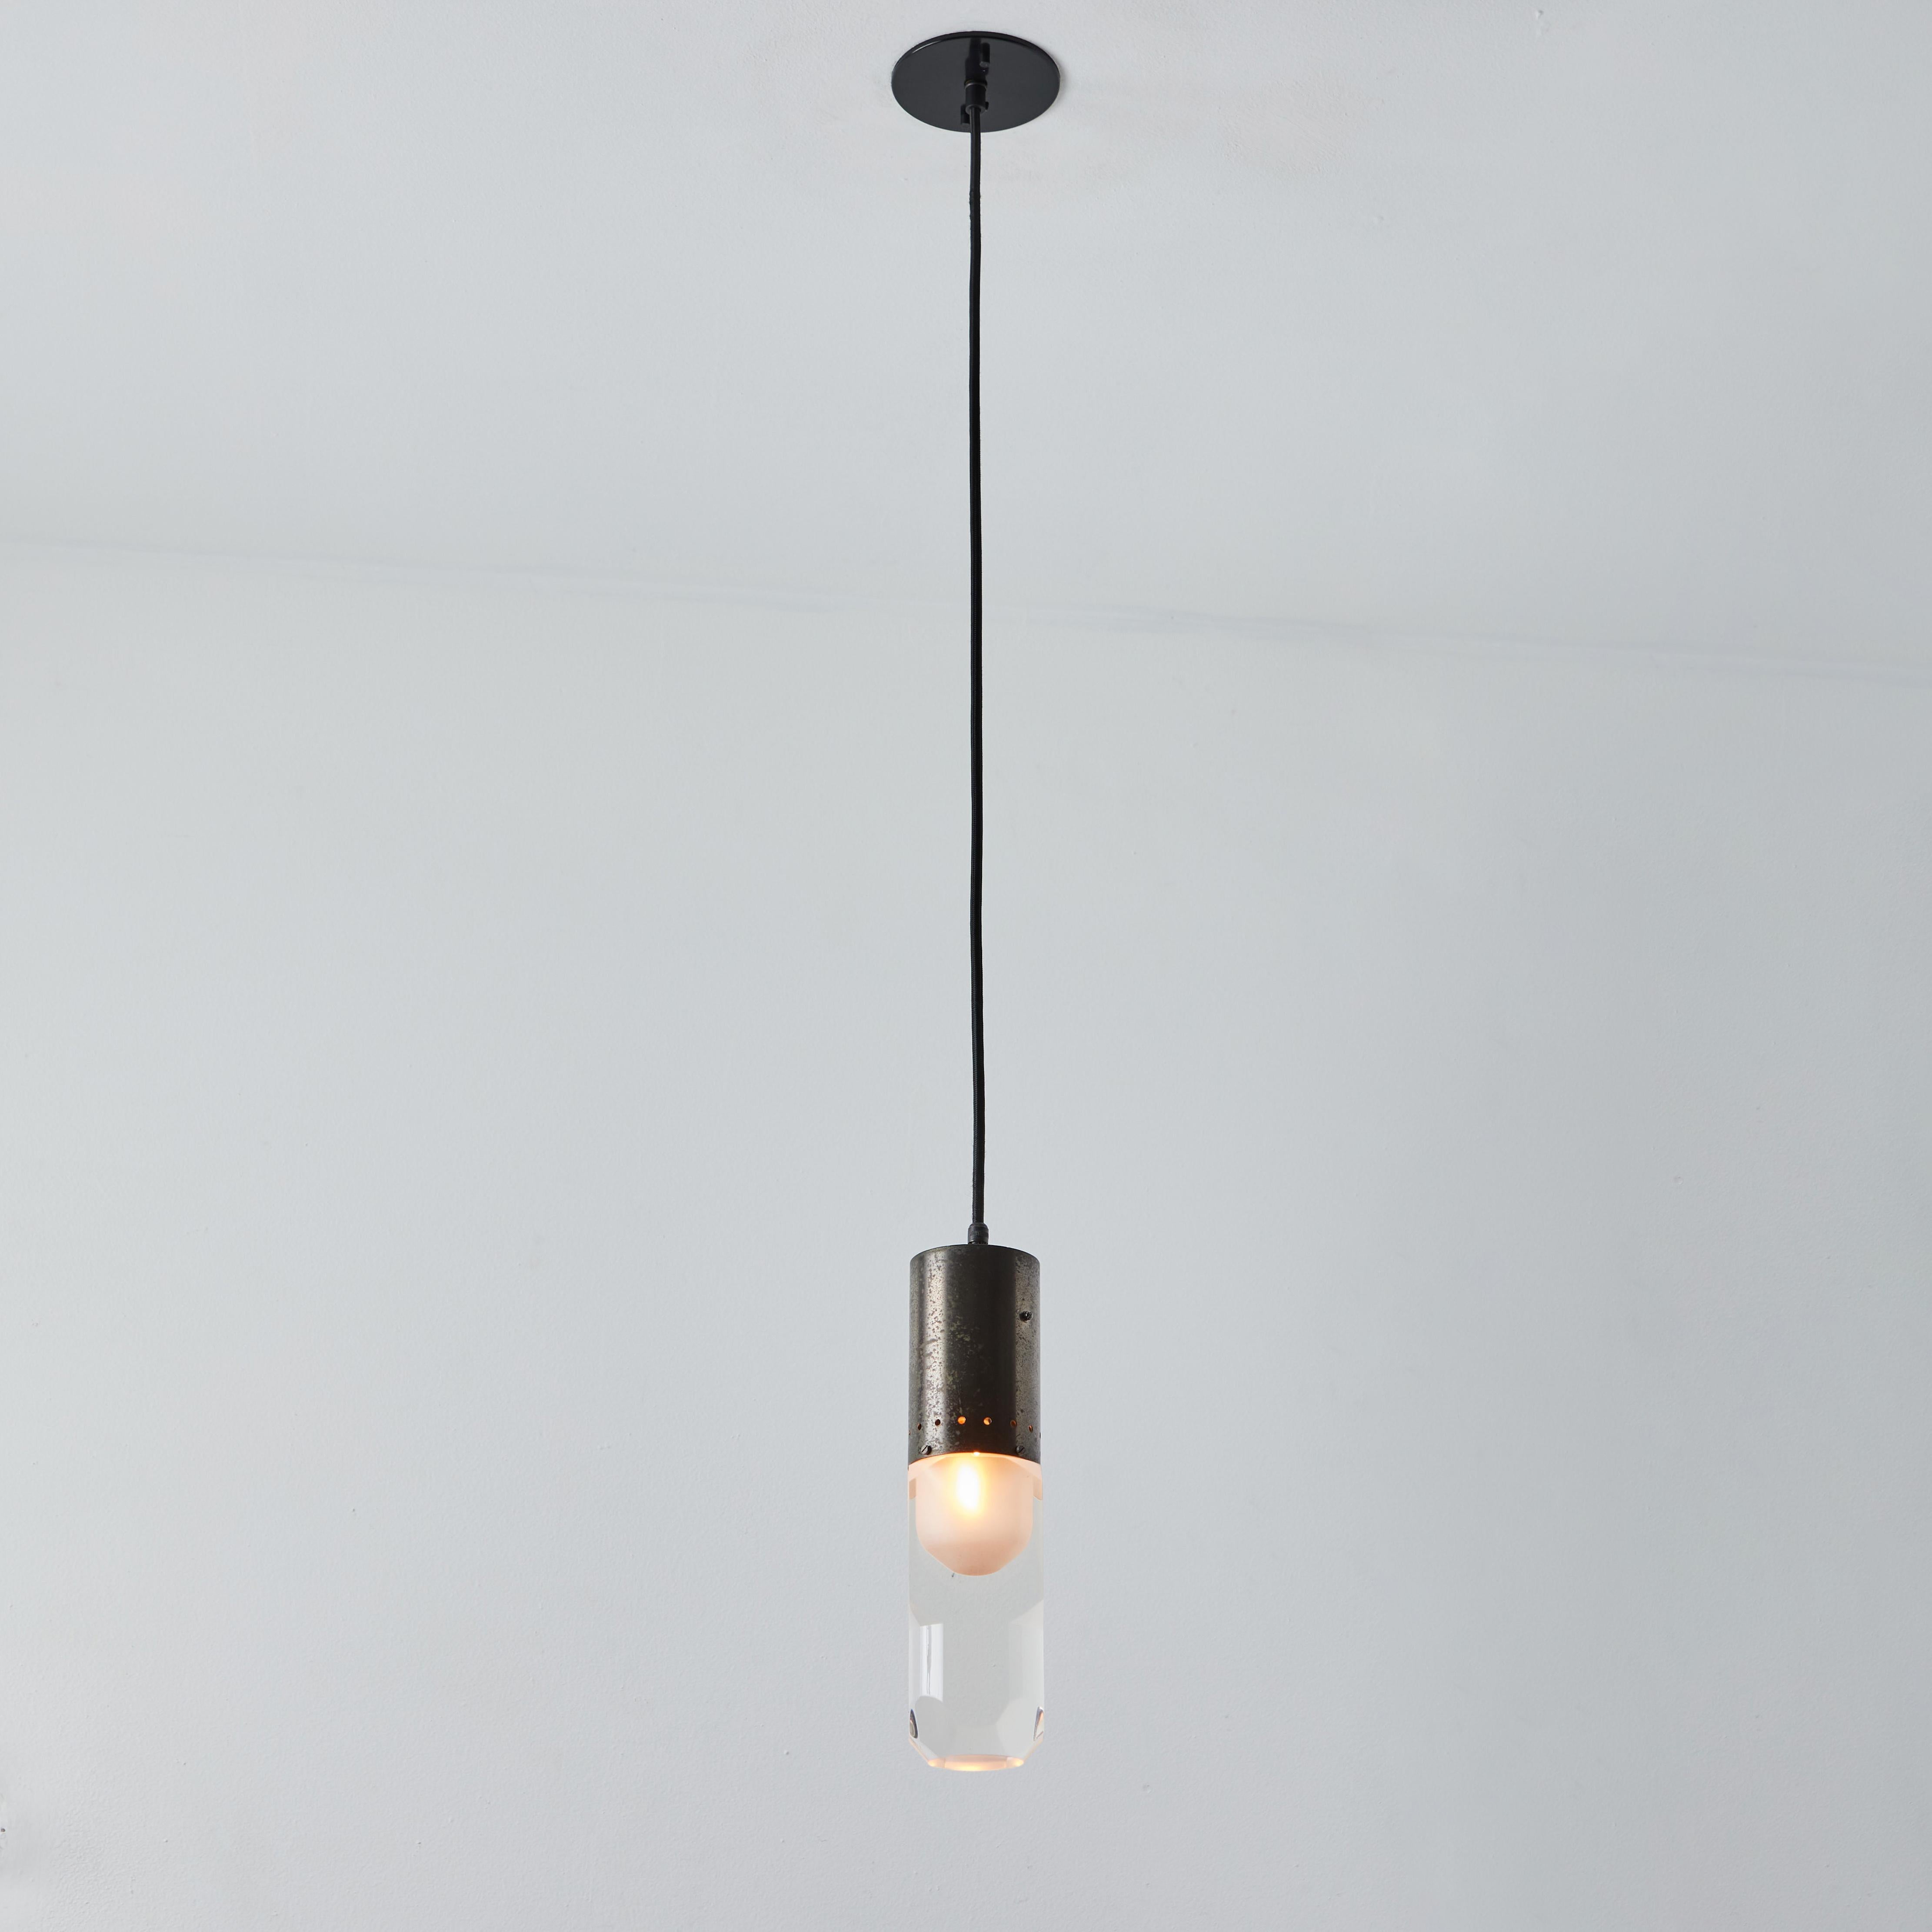 1960s Faceted Diffuser Pendant Lamp Attributed to Stilnovo For Sale 4